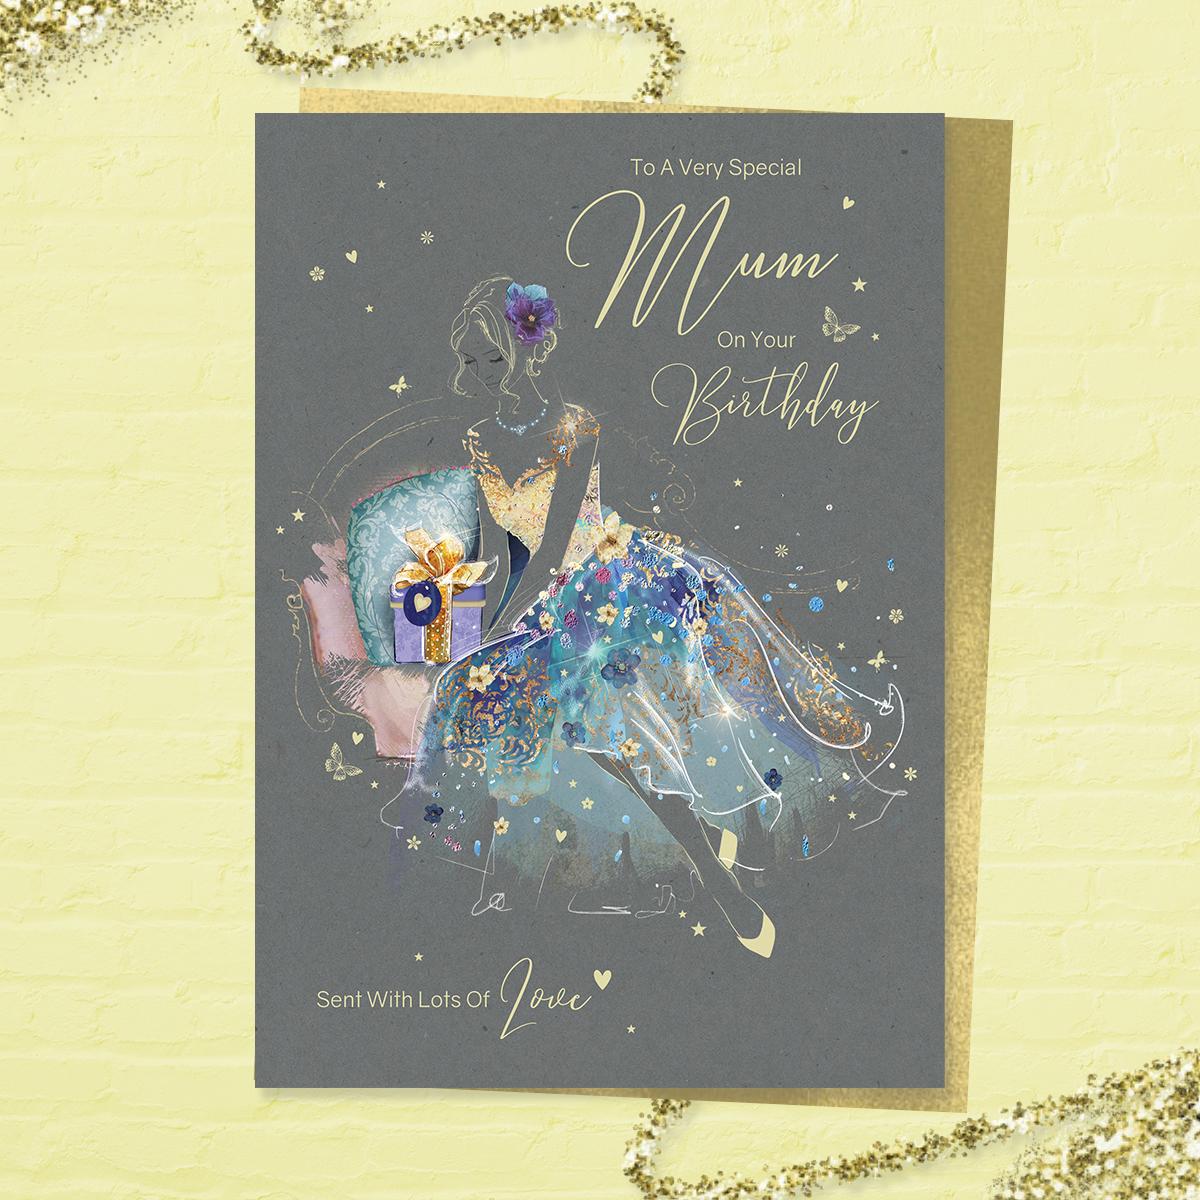 'Just For You Mum On Your Birthday' larger card from the 'Grace' range. Beautiful Lady in A Blue And Gold Dress. Added Sparkle And Gold Foil Detail. Printed Insert With Colour Image And Heartfelt Verse. Complete With Gold Colour Envelope